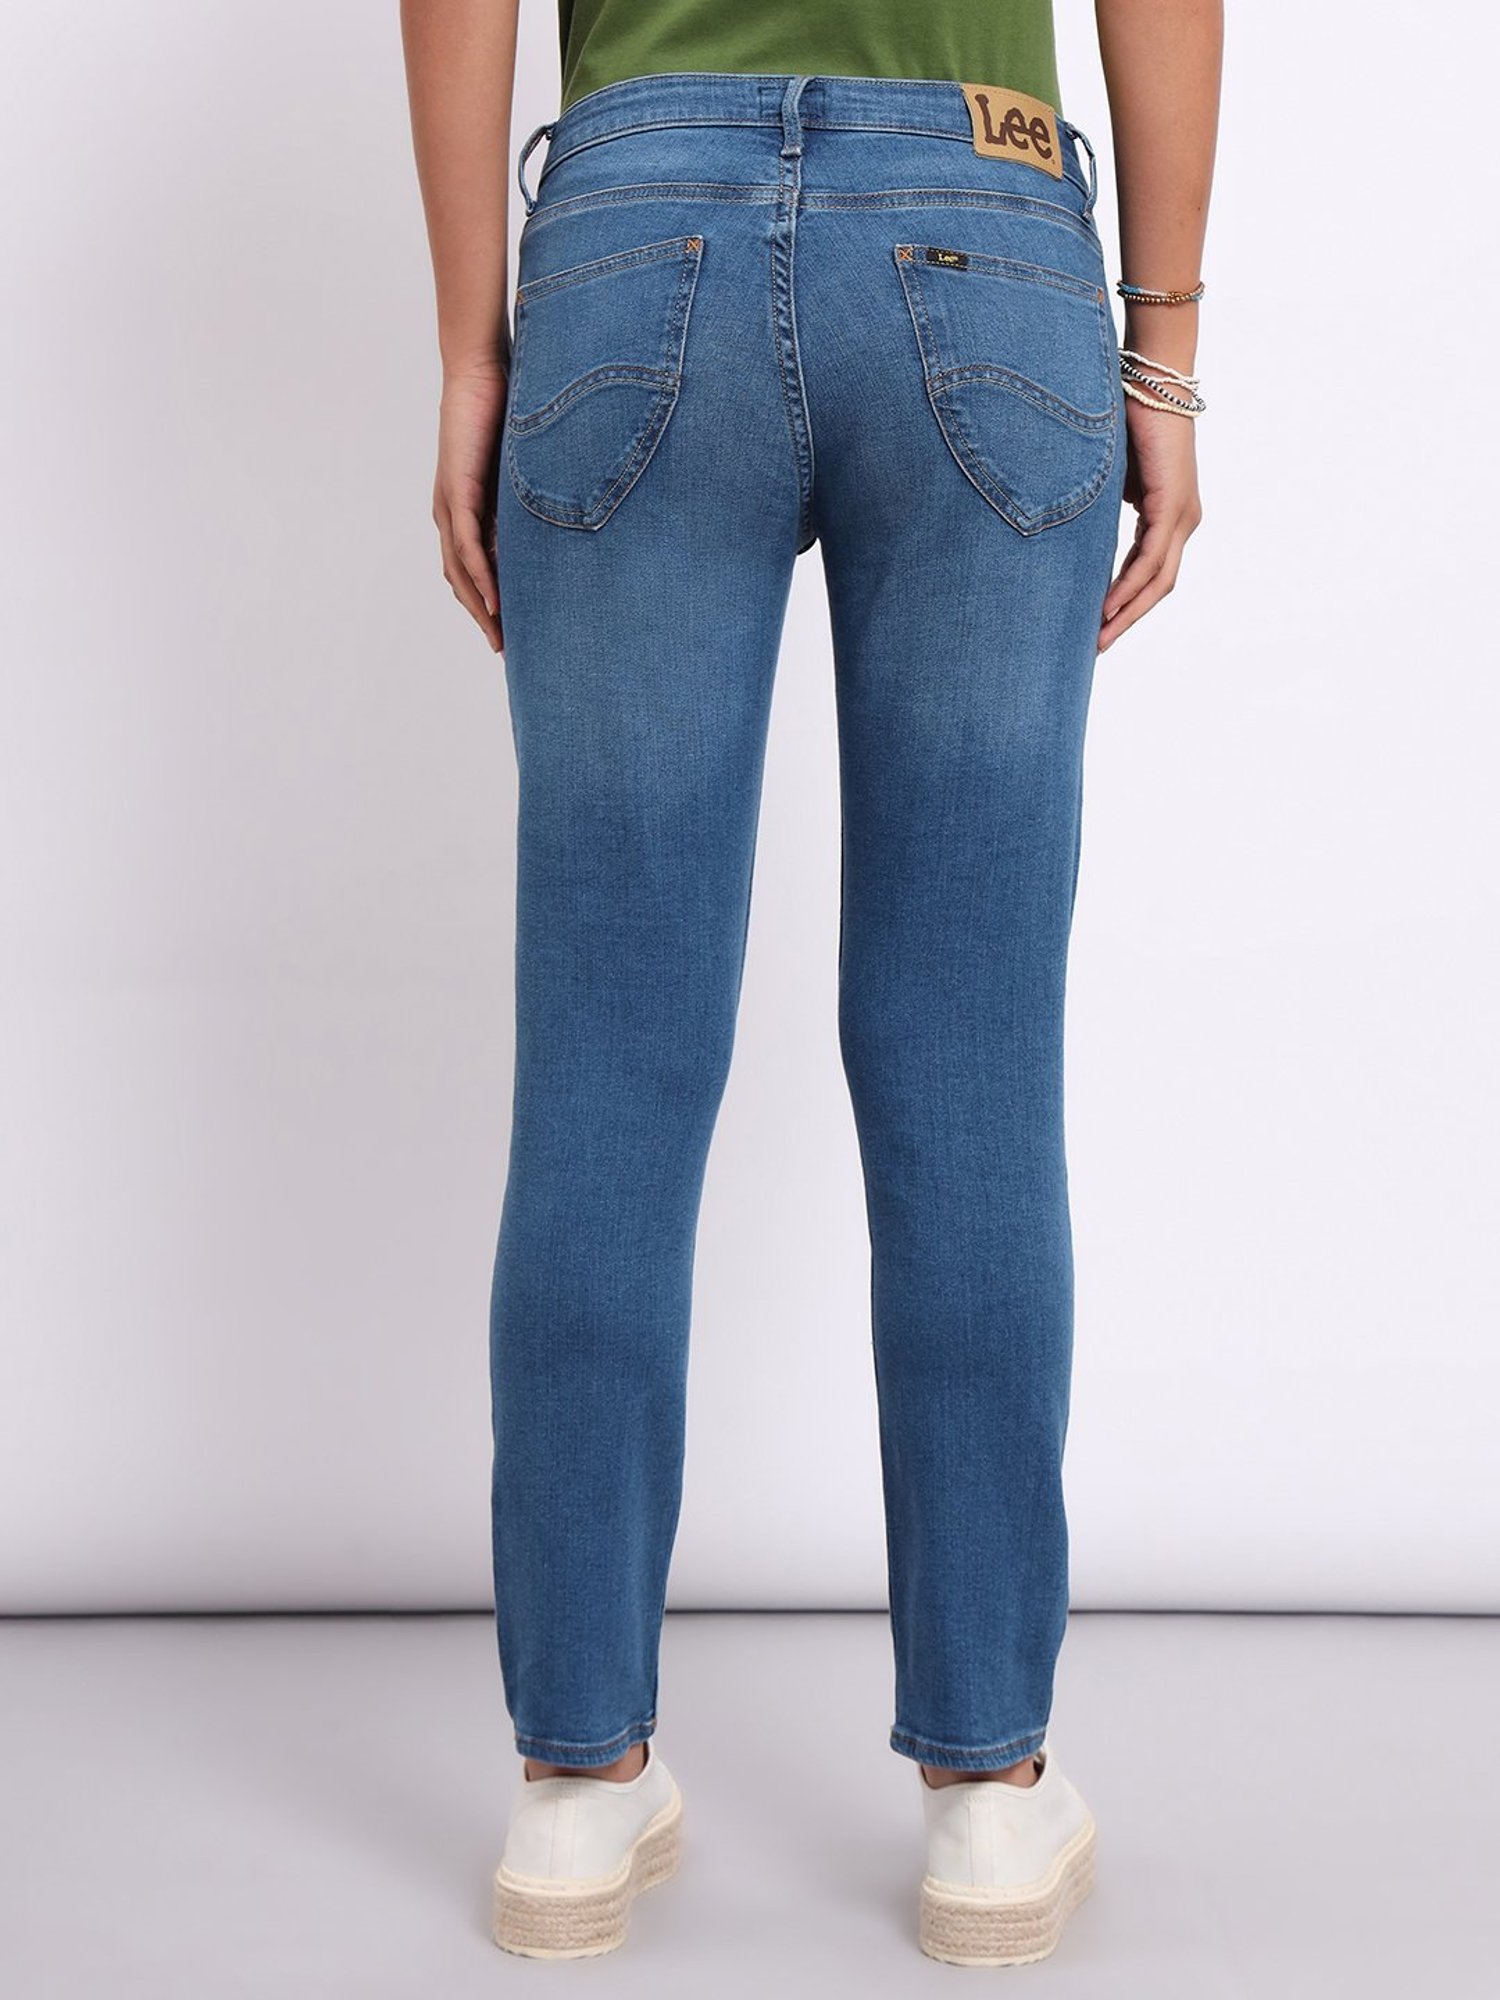 Lee Light Indigo Relaxed Fit High Rise Jeans